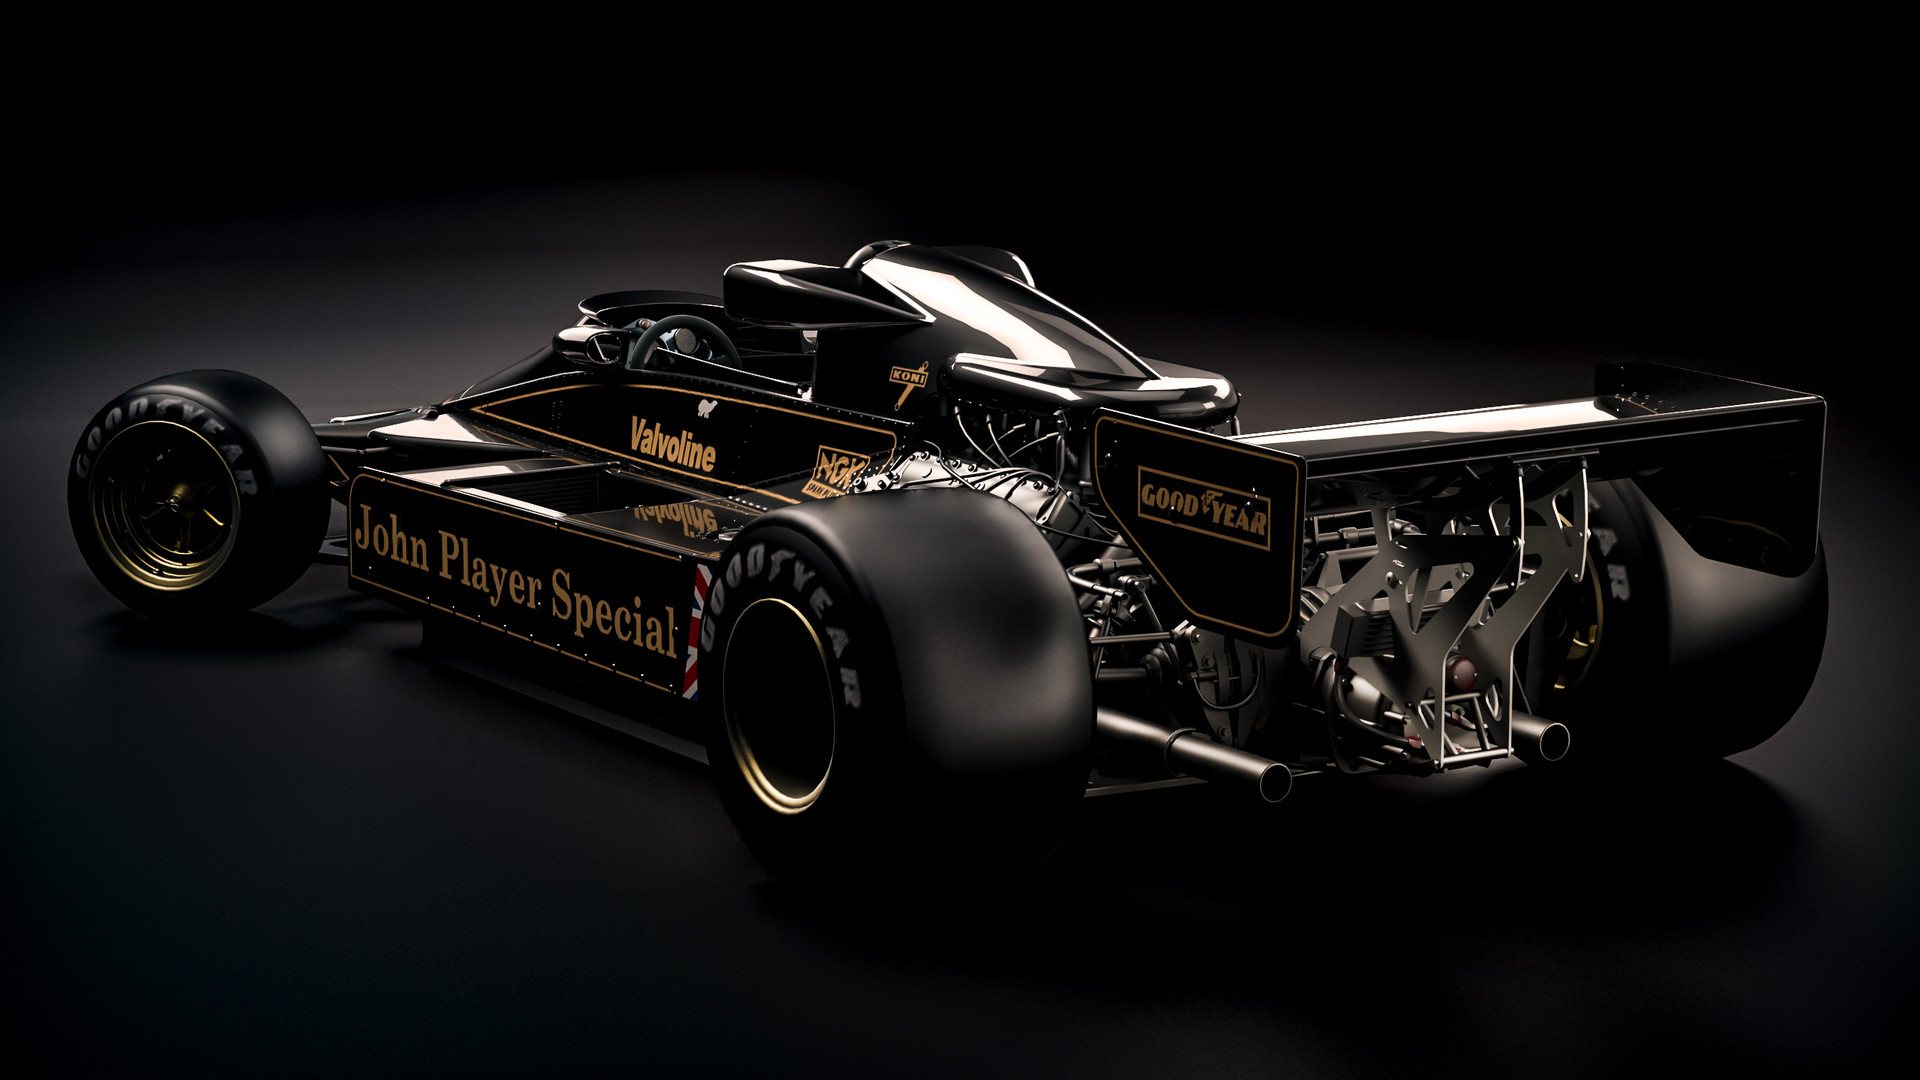 F1 2018 Classic Cars Revealed - To include Lotus 72 and 79